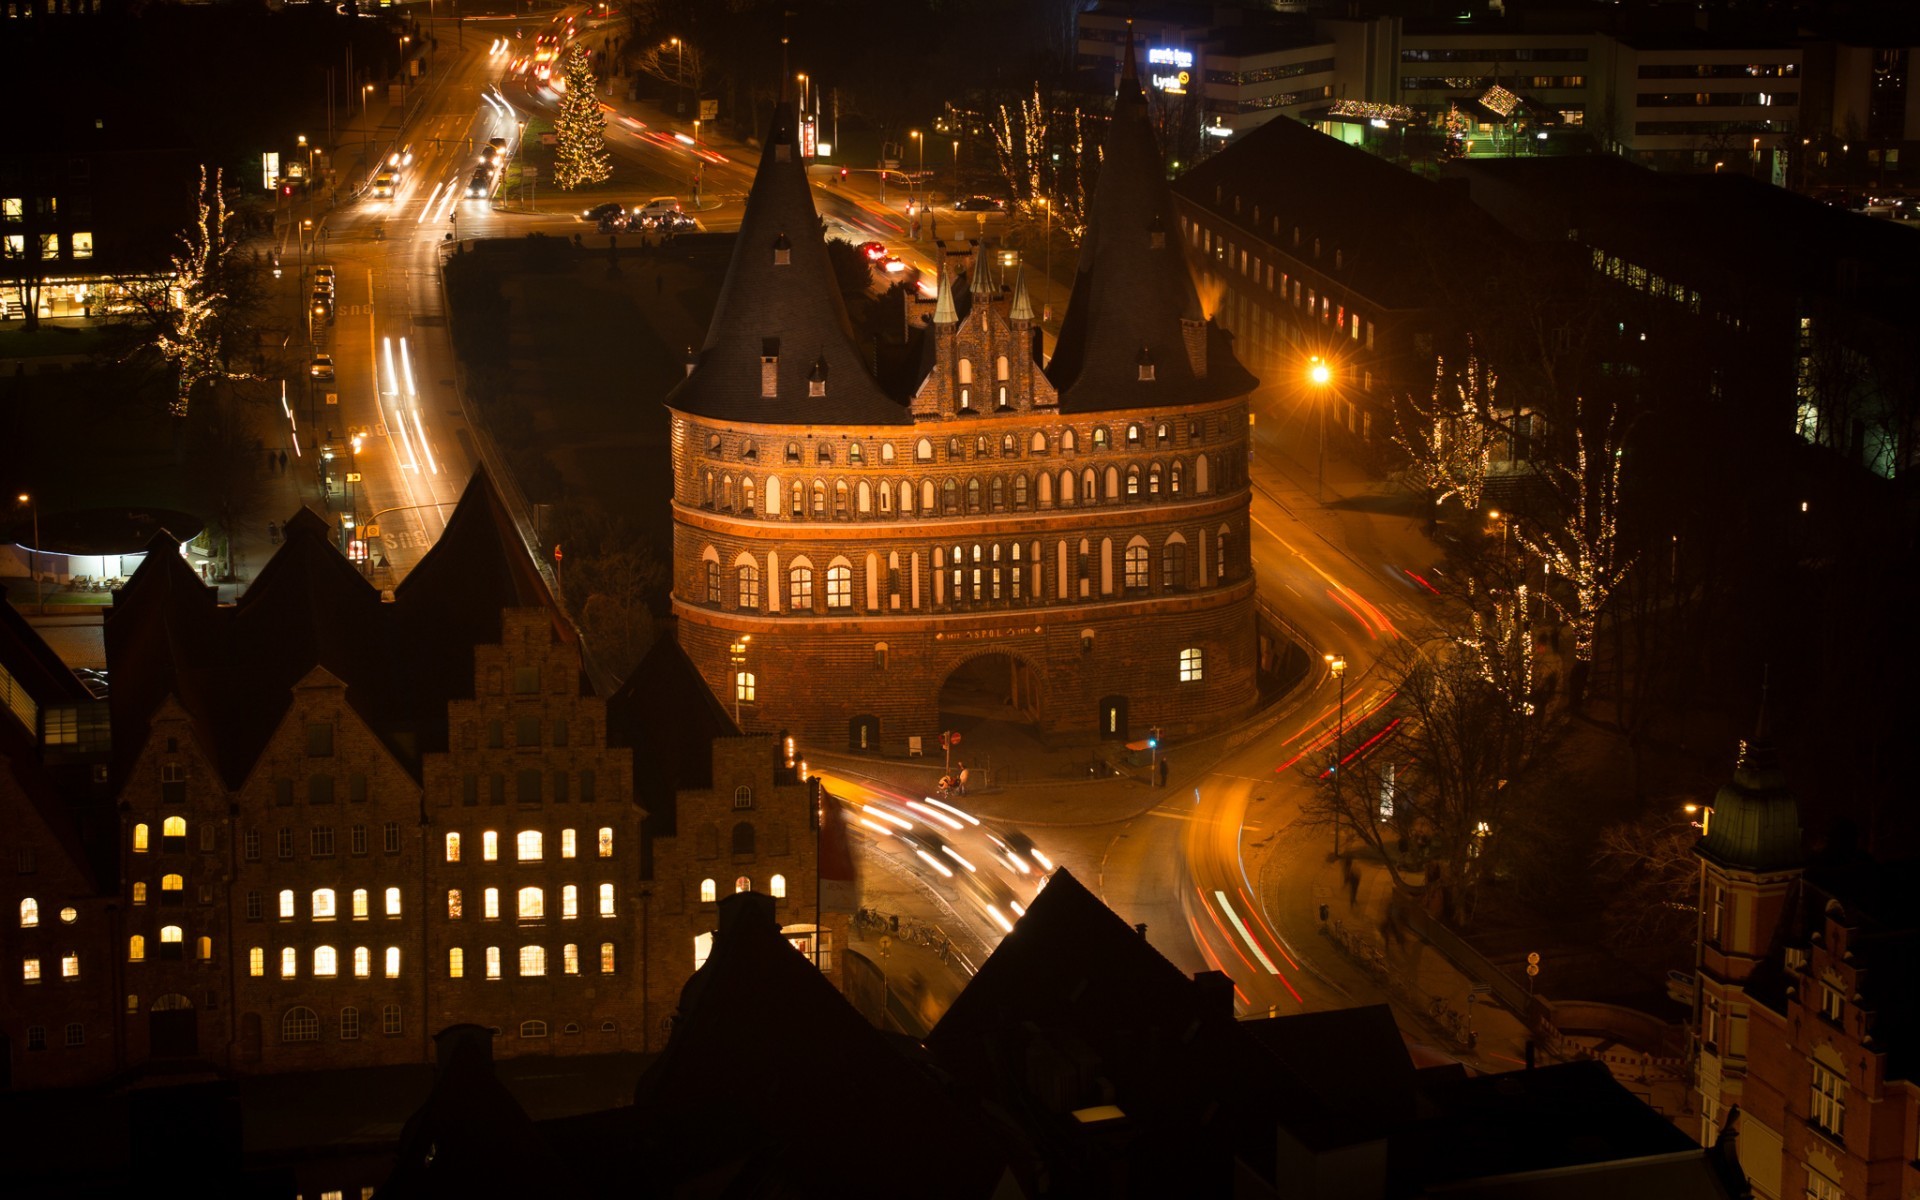 city, Cityscape, Architecture, Street, Night, Lights, Street Light, Old Building, Tower, Lübeck, Germany, Light Trails, Church, Long Exposure, Birds Eye View, Rooftops, Car, Traffic, Trees Wallpaper